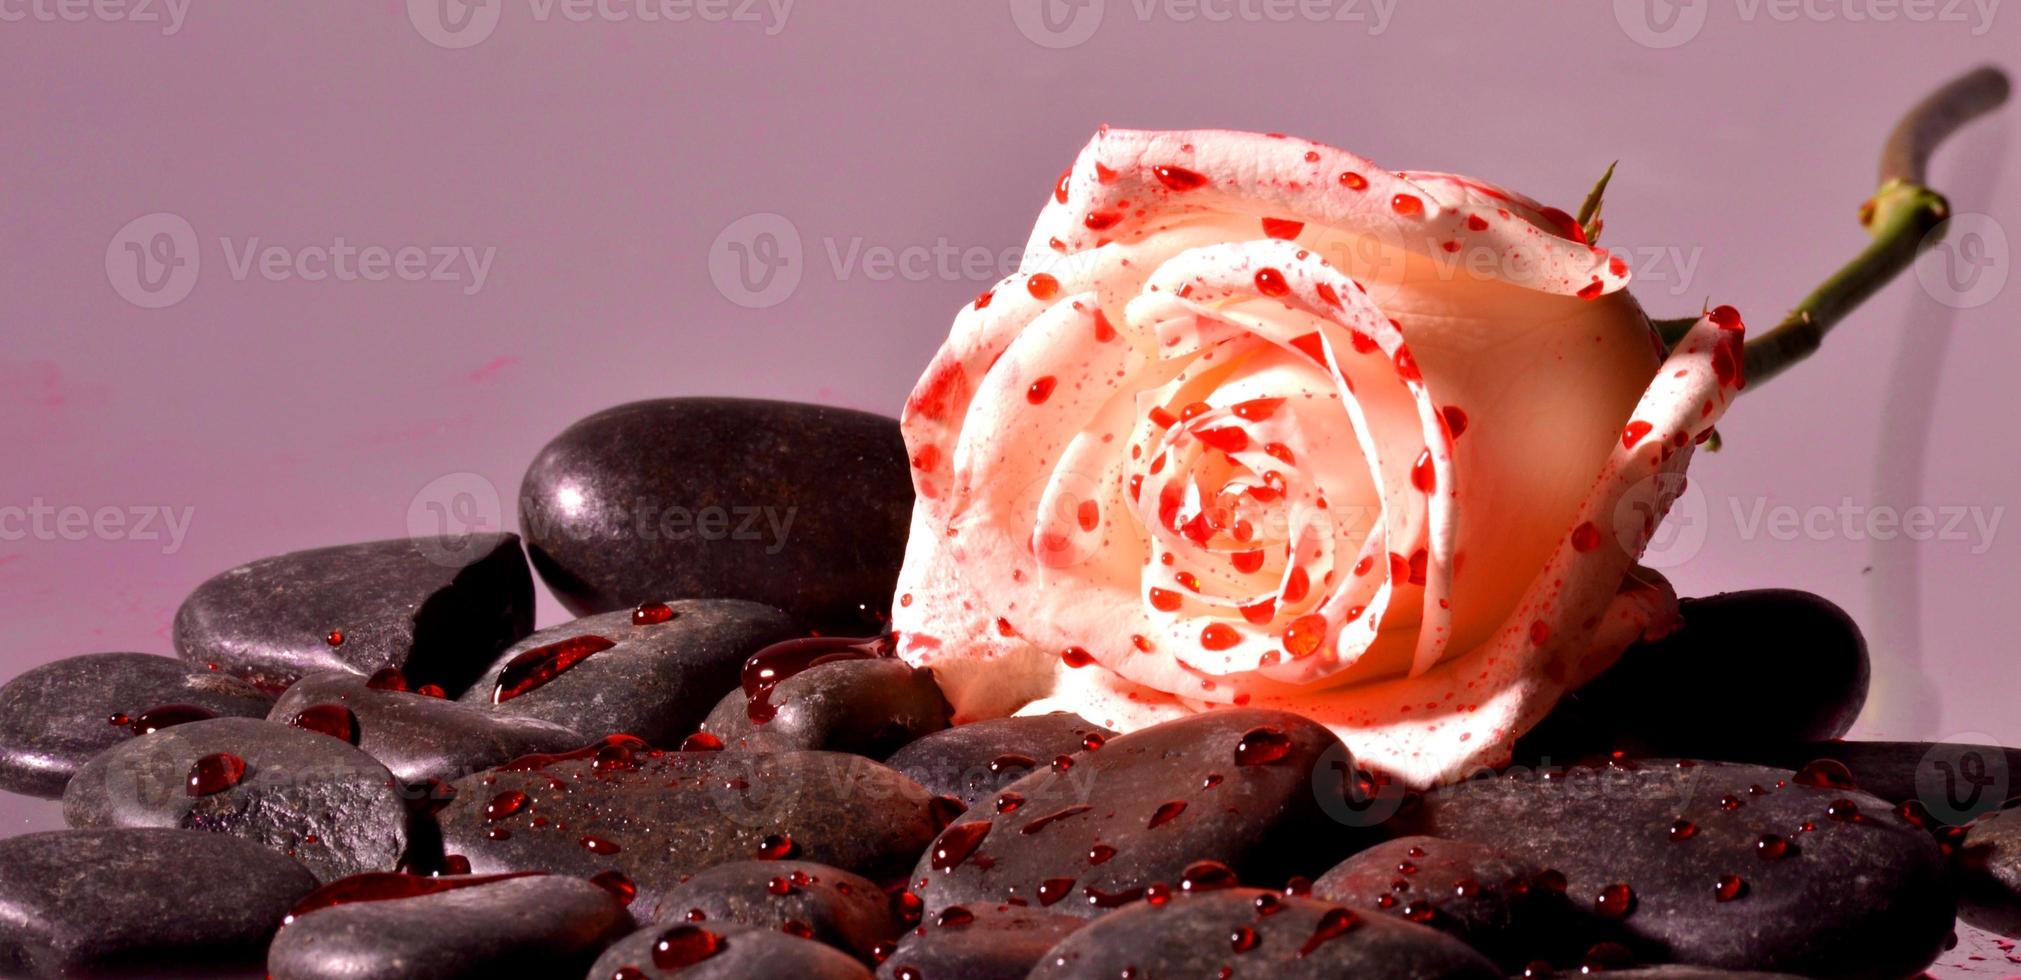 Blood splattered rose and stones photo